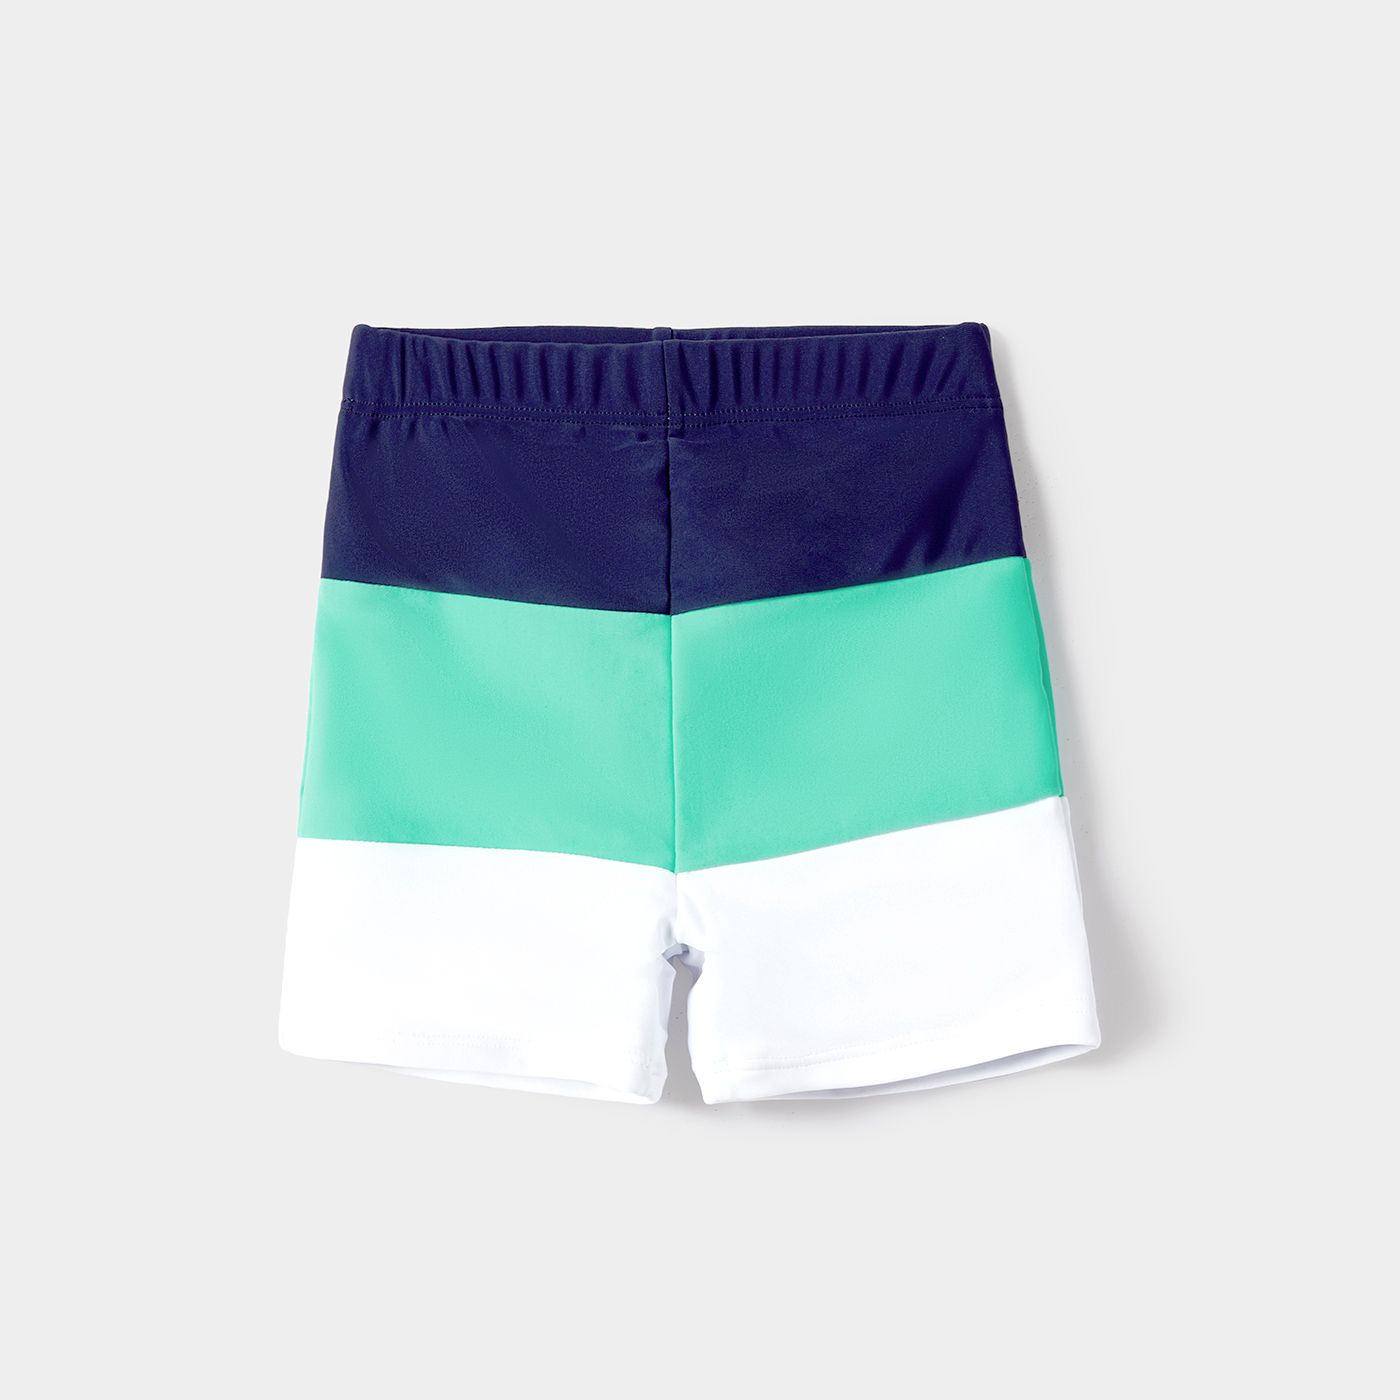 Family Matching Allover Anchor Print Colorblock Self Tie One-piece Swimsuit Or Swim Trunks Shorts